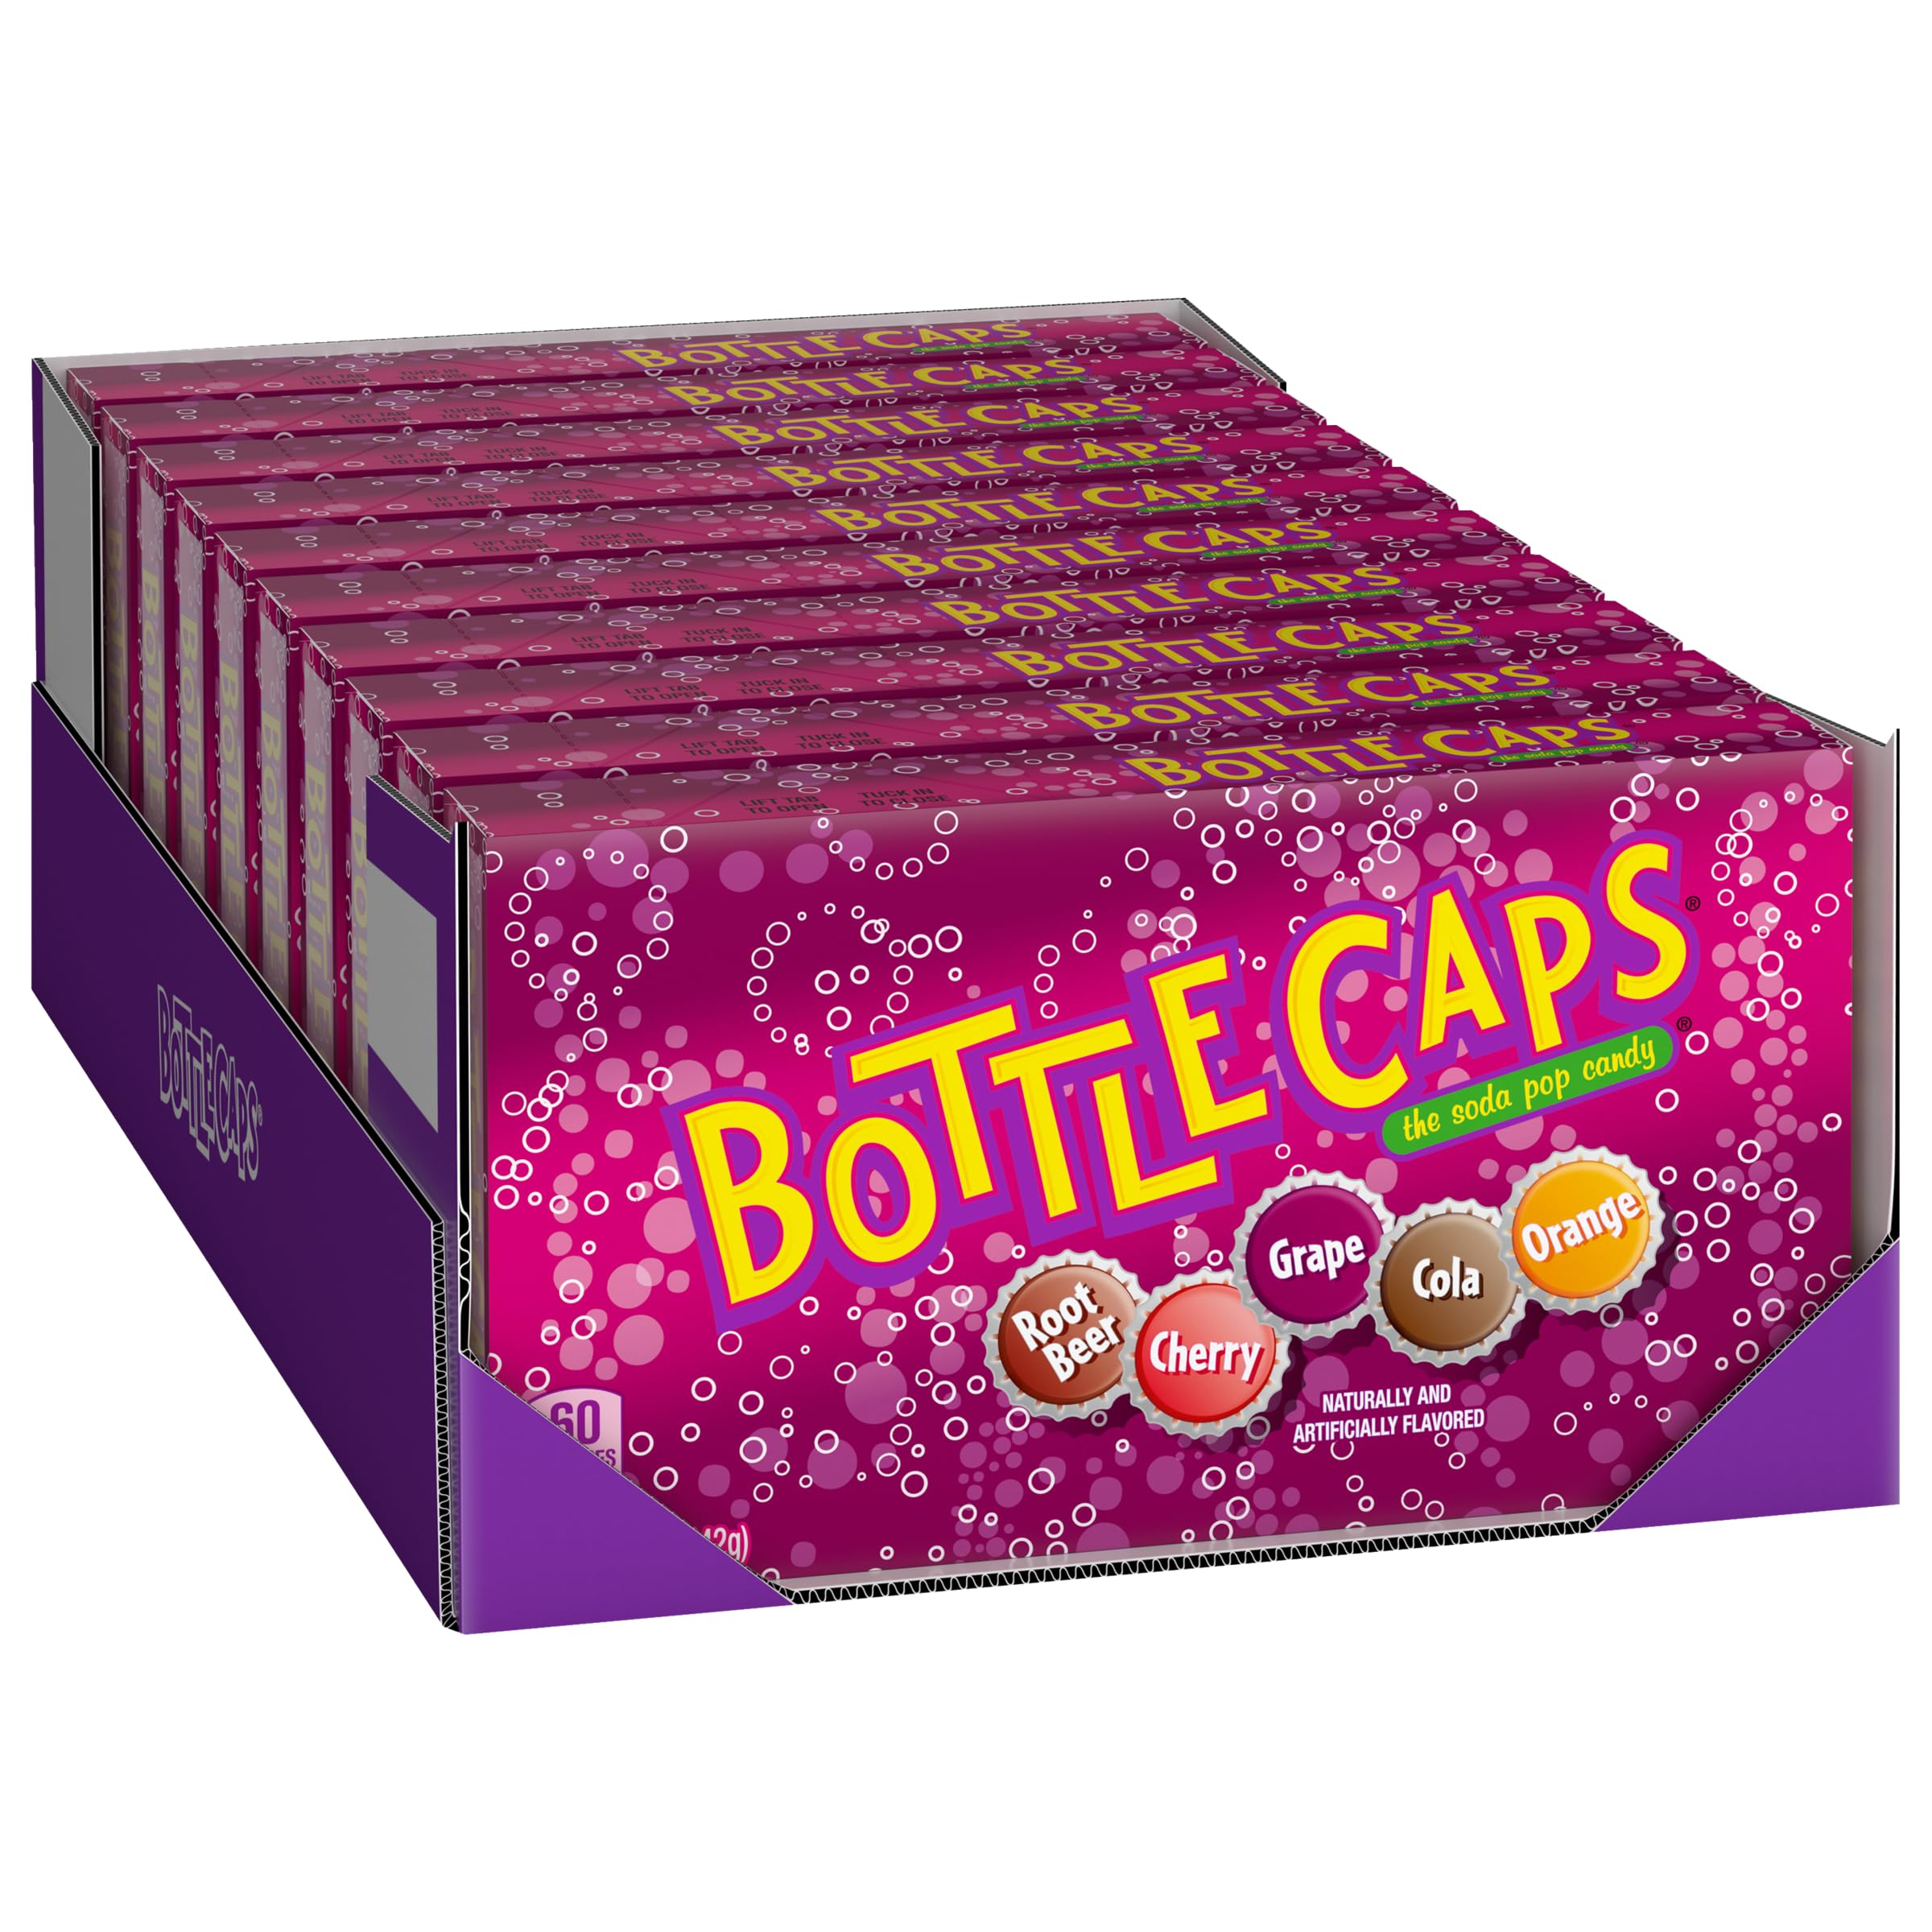 Wonka Bottle Caps, Fizzy Hard Candy, 5 Ounce Theater Candy Boxes (Pack of 10)